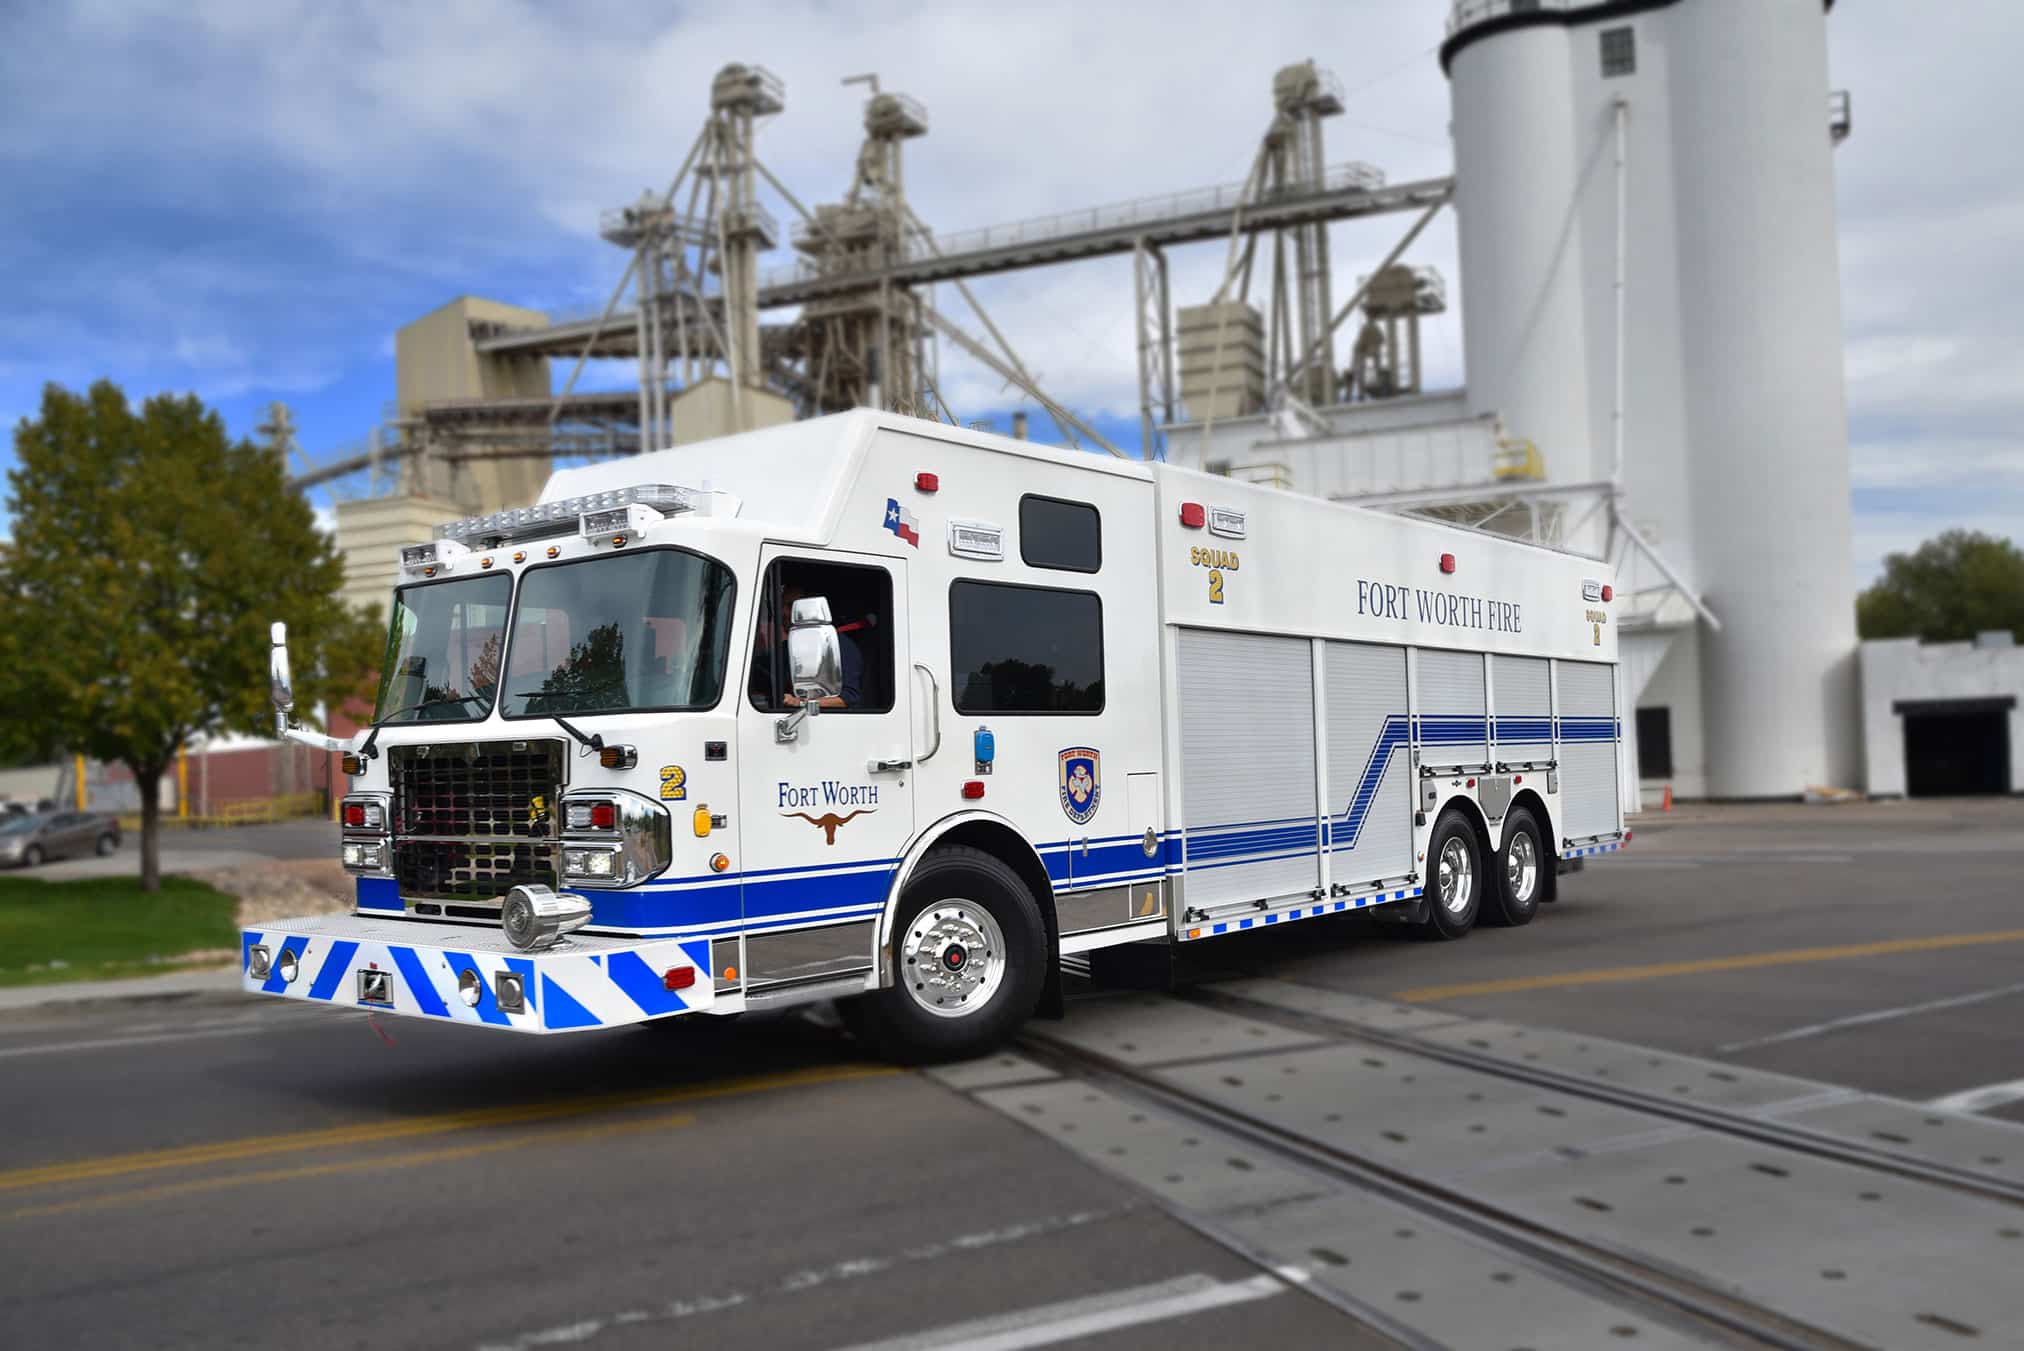 Featured image for “Fort Worth, TX Fire Department Heavy Rescue #1057”